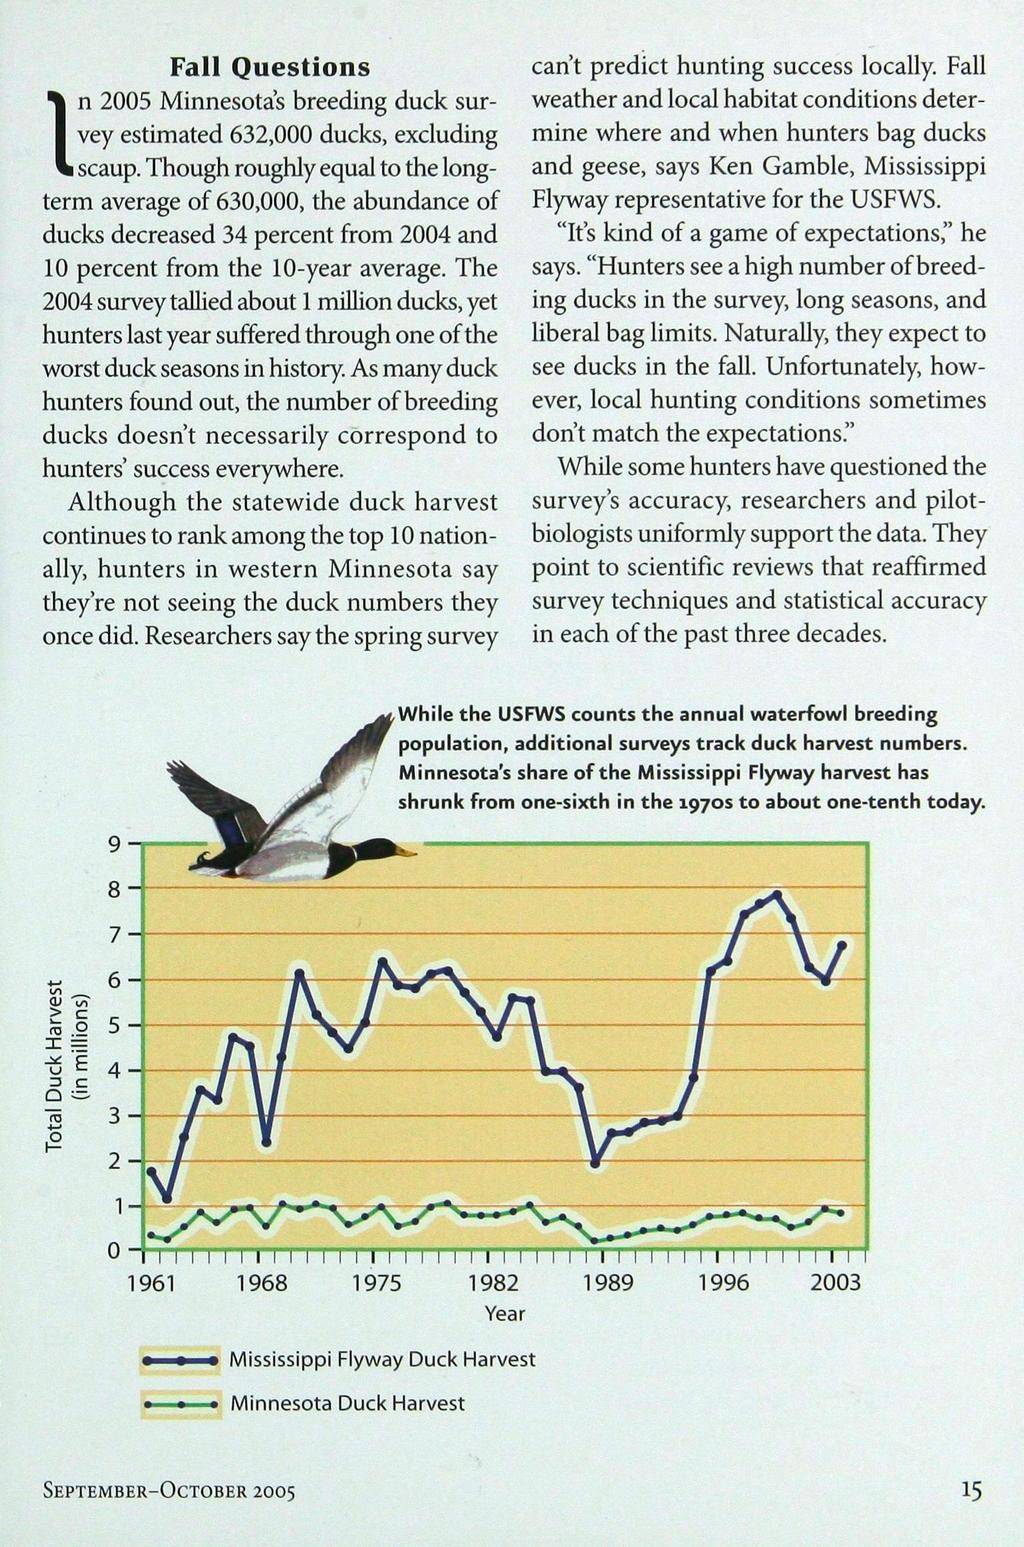 Fall Questions In 2005 Minnesota's breeding duck survey estimated 632,000 ducks, excluding scaup.